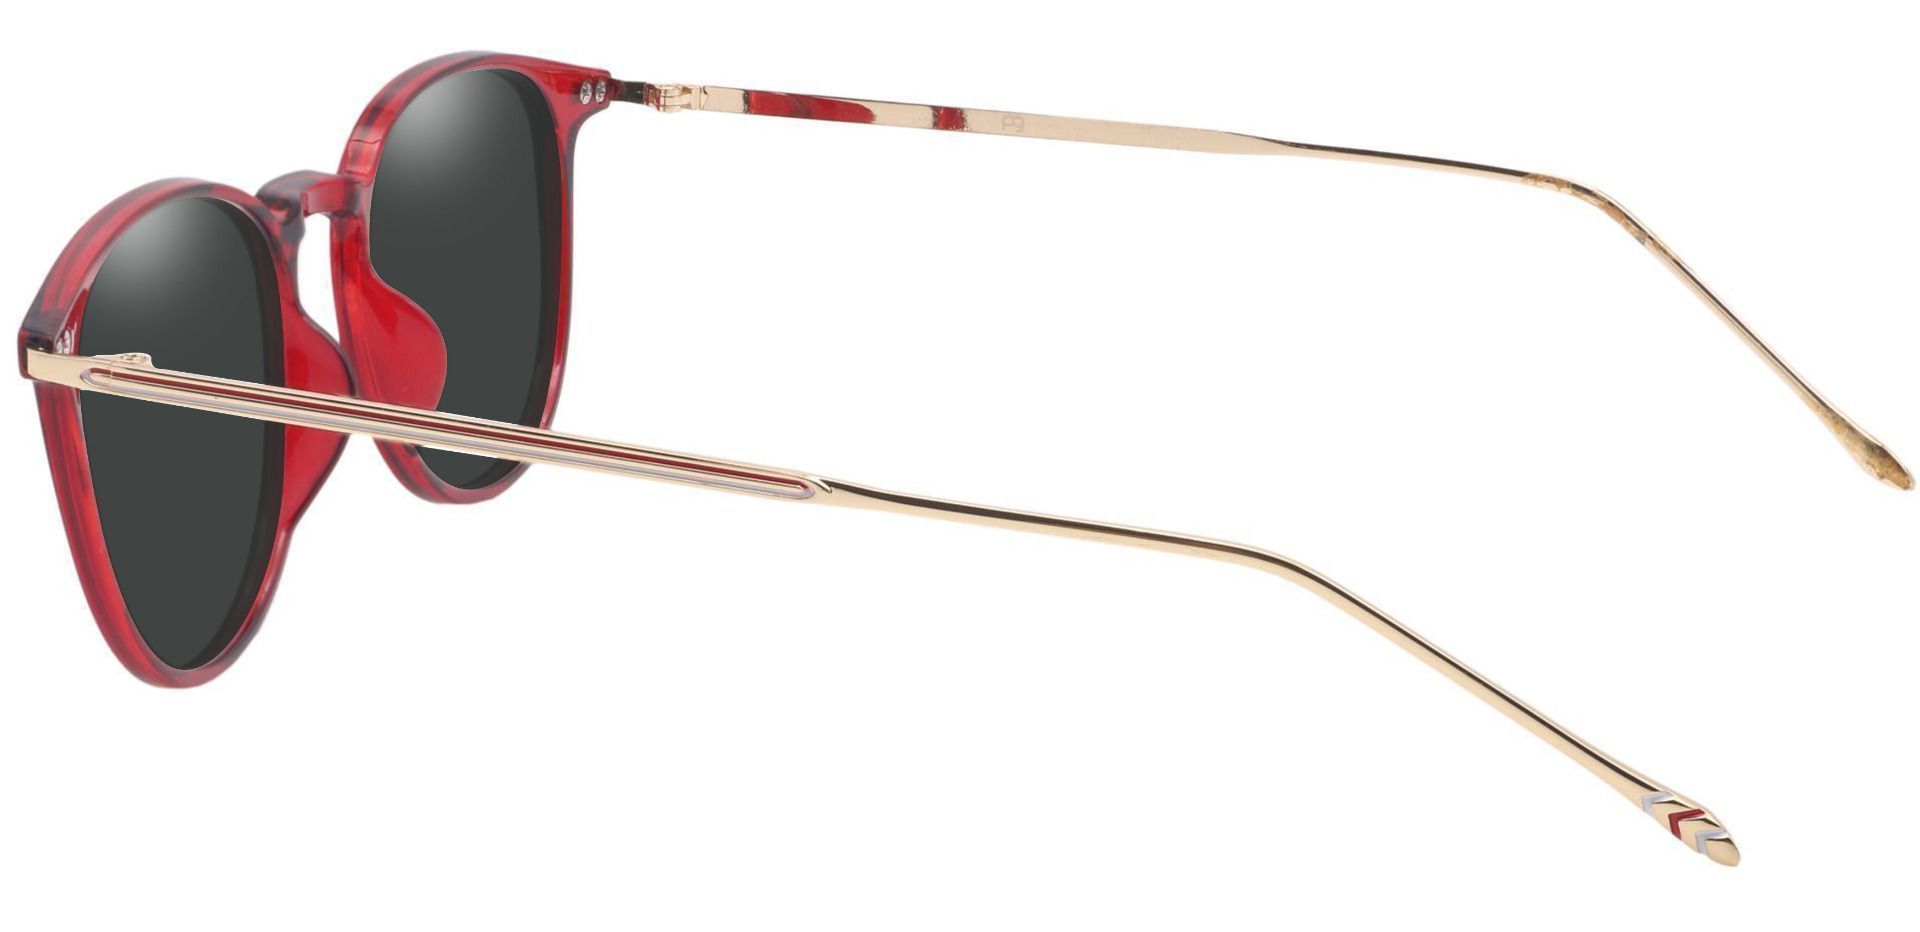 Elliott Round Non-Rx Sunglasses - Red Frame With Gray Lenses